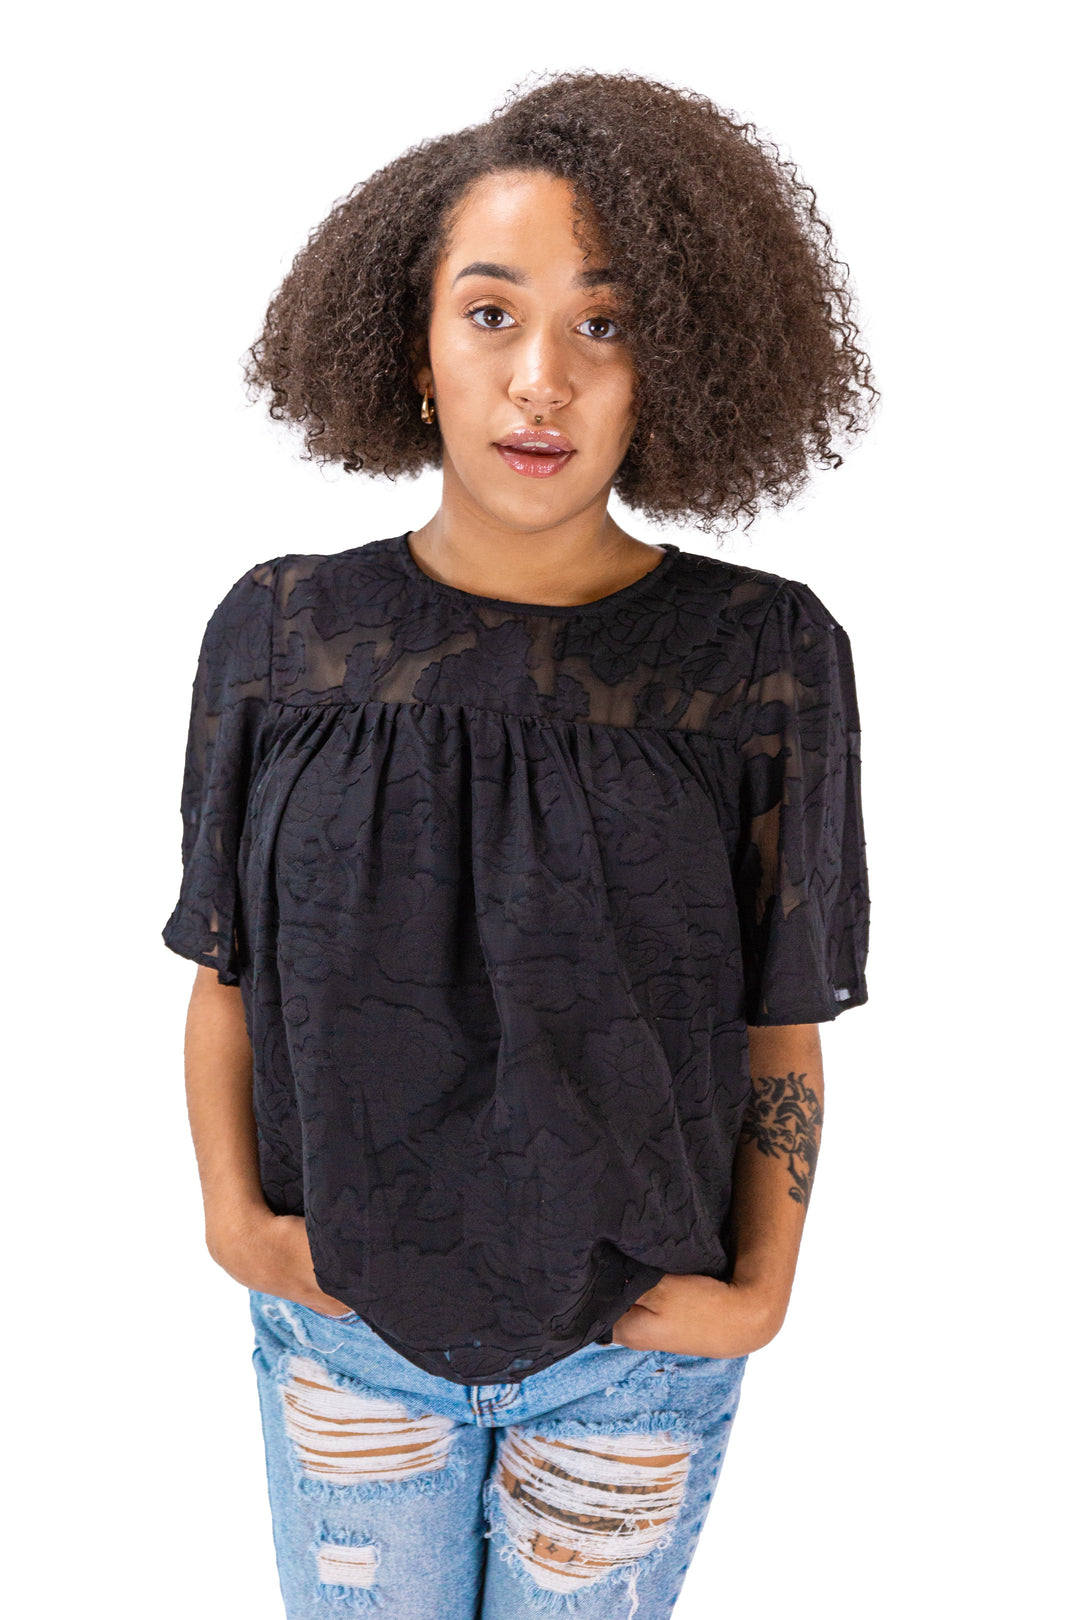 Fabonics Elegant Noir Black Top with Floral Pattern and Short Sleeves, Ideal for Versatile and Stylish Summer Wear